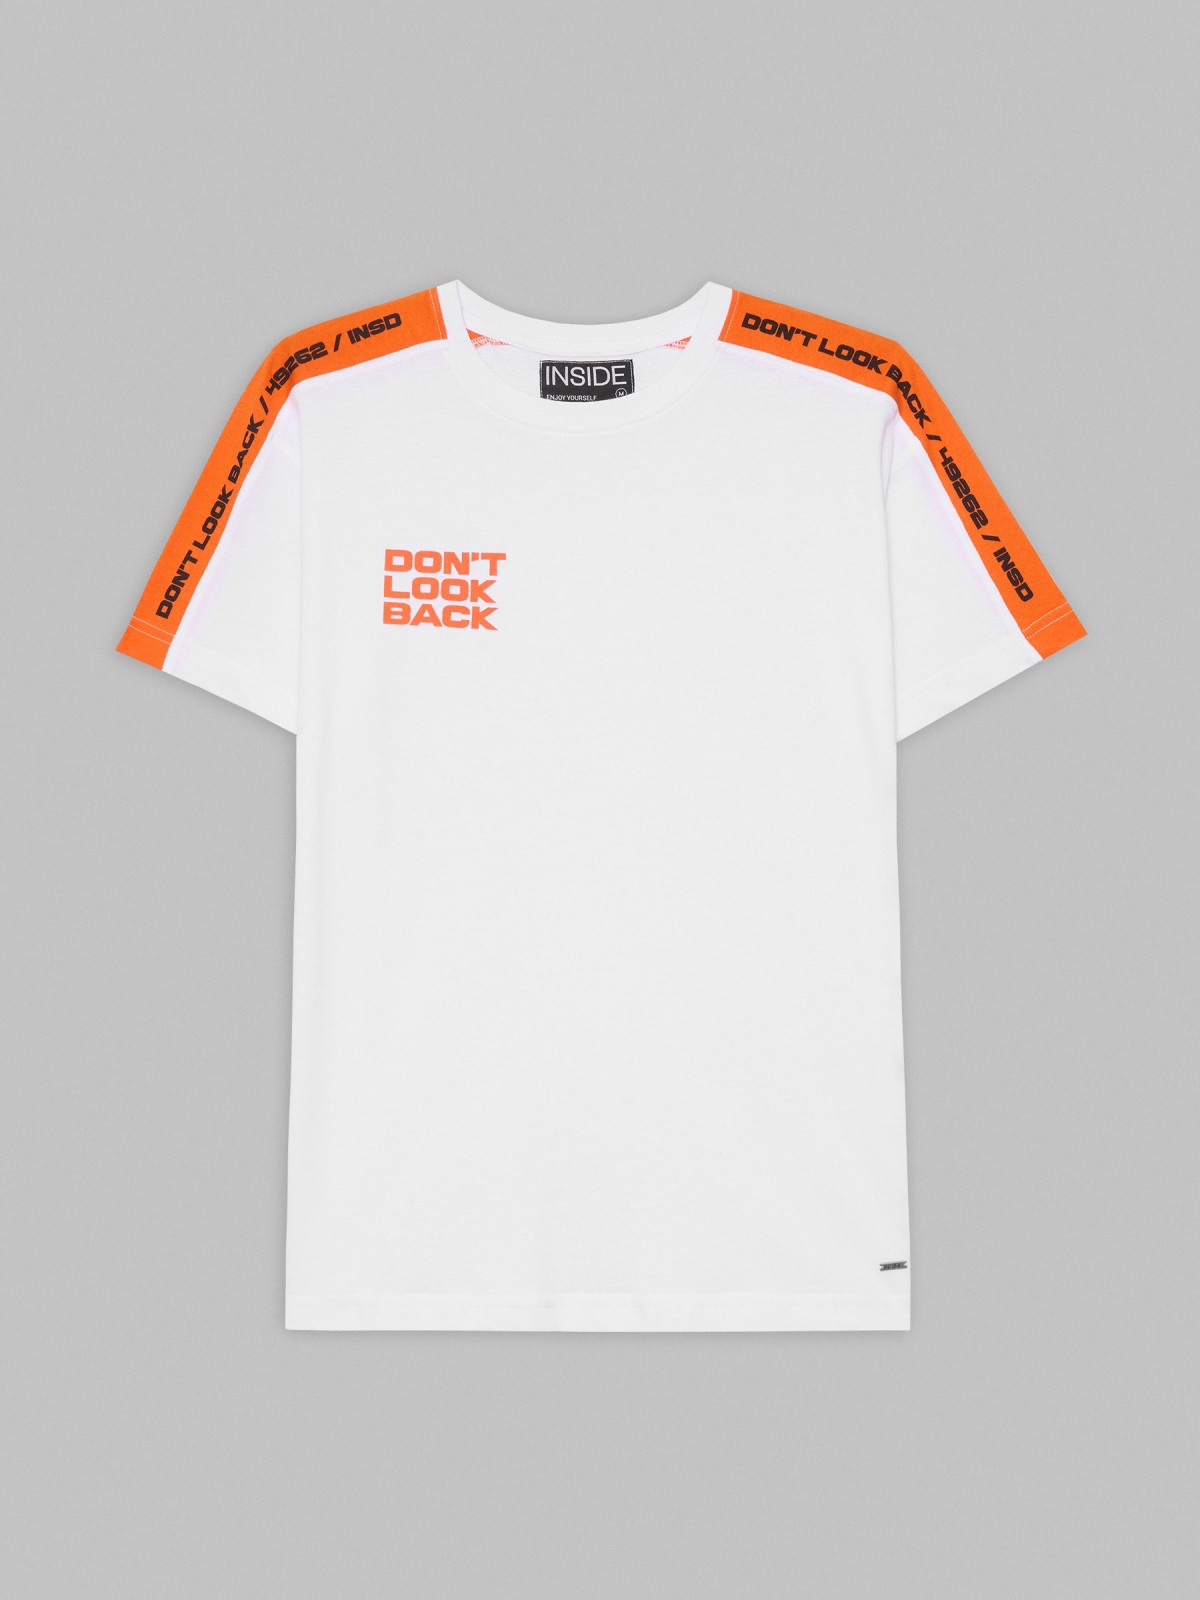  Dont look back T-shirt white